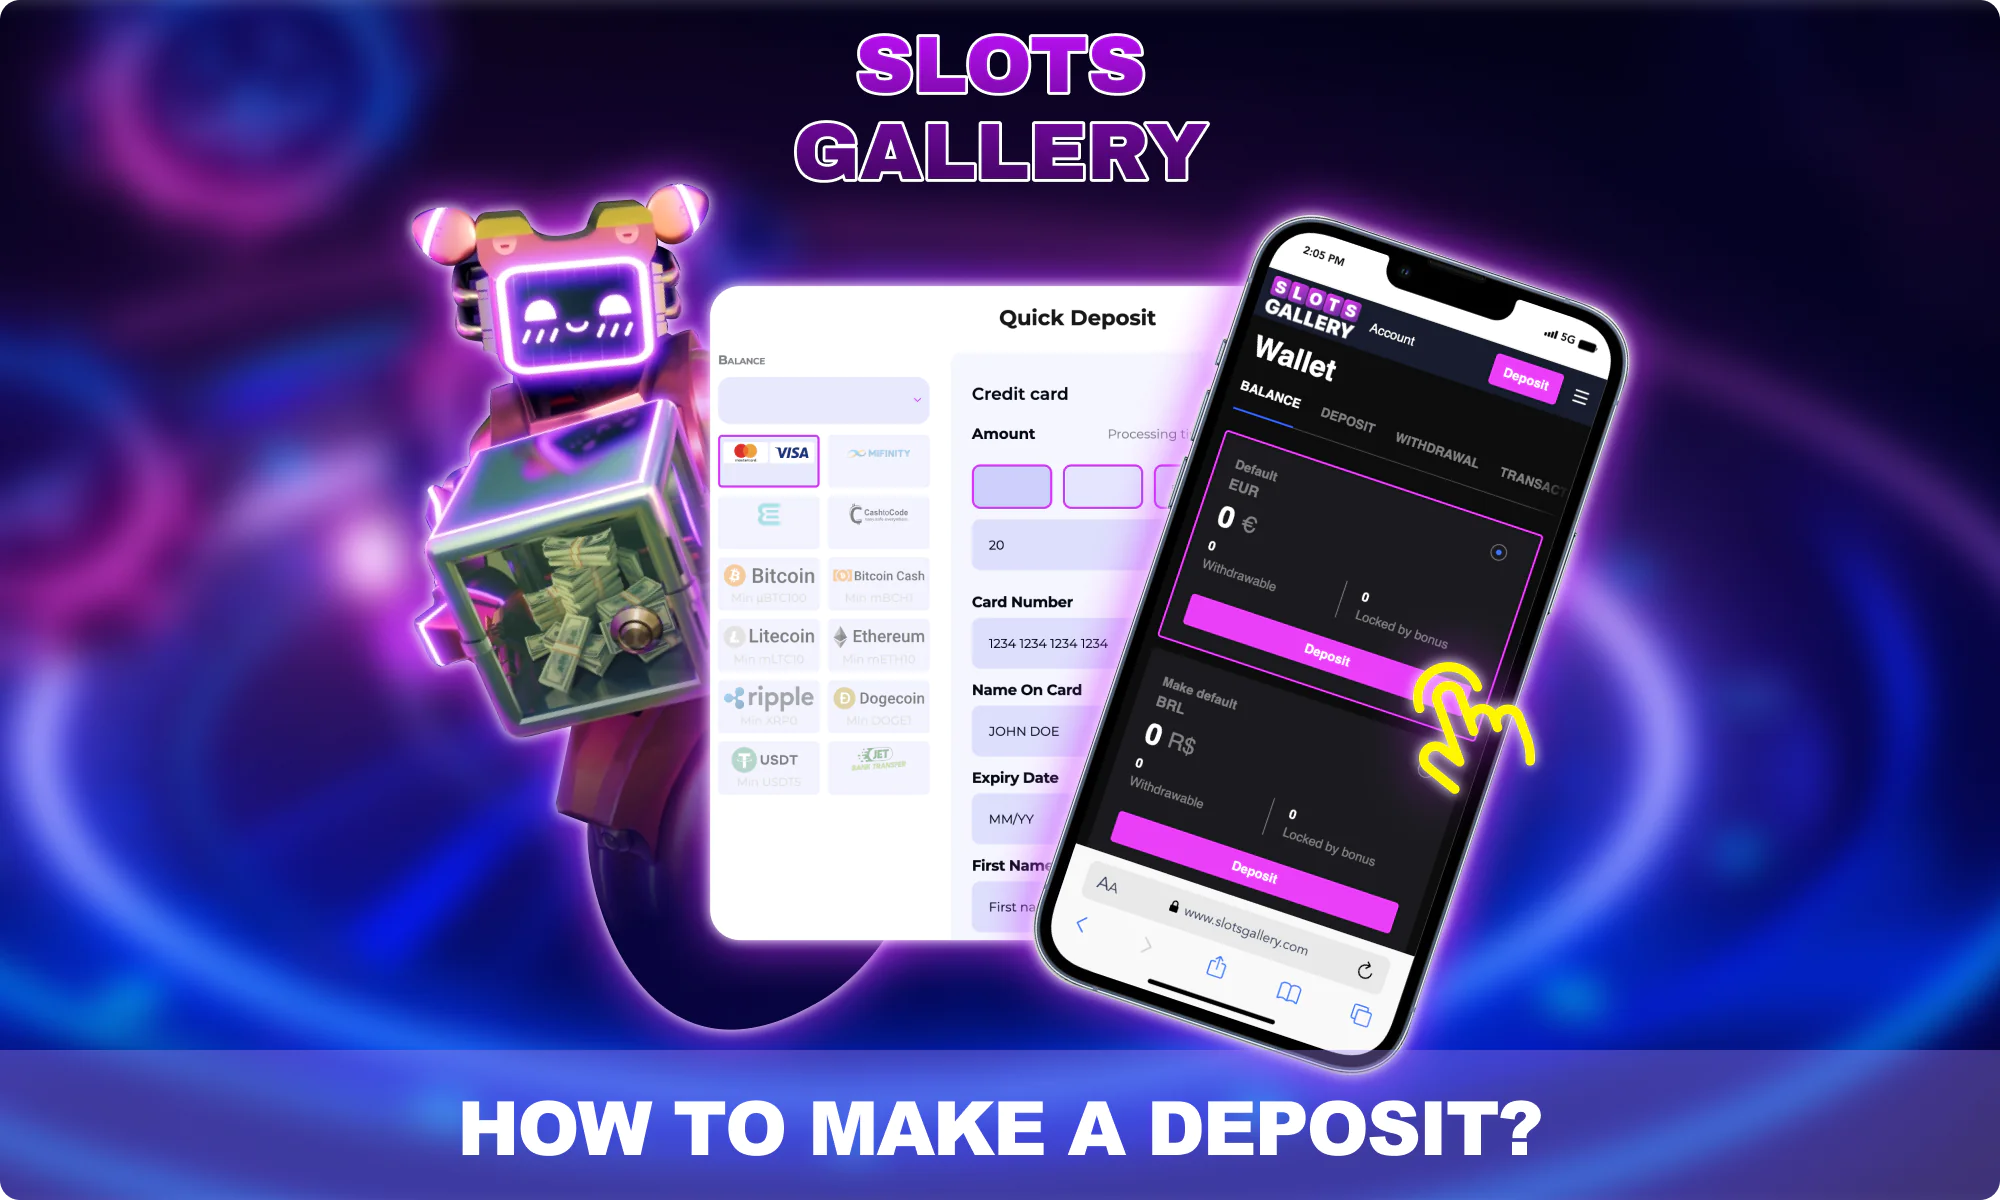 Step-by-step instructions for replenishing your balance on the Slots Gallery Australia website